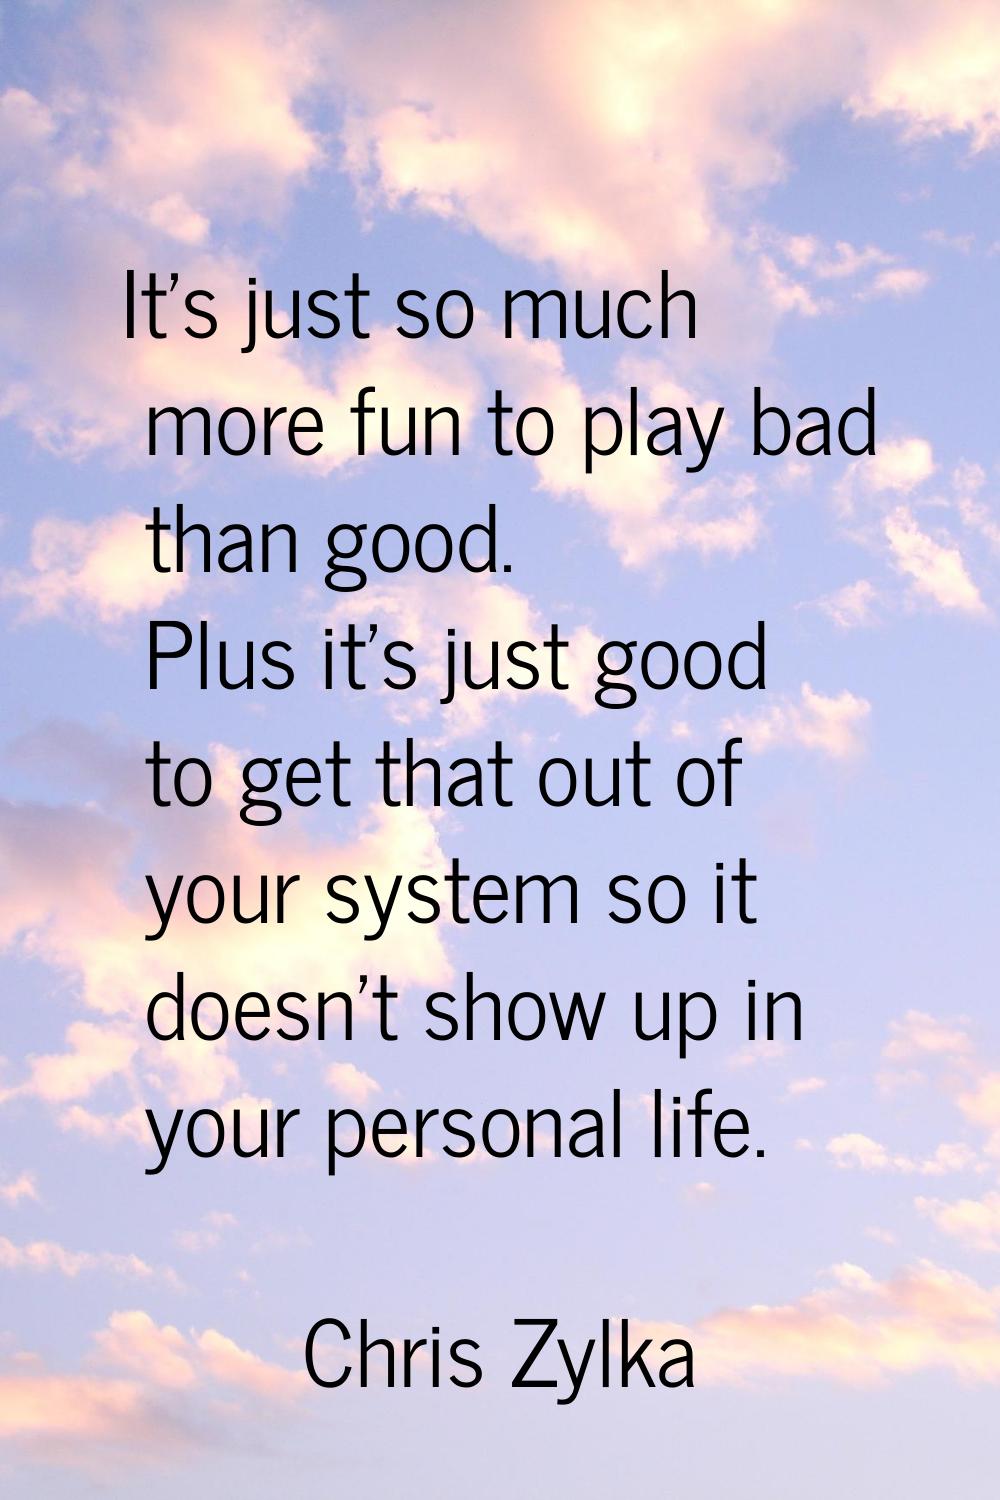 It's just so much more fun to play bad than good. Plus it's just good to get that out of your syste